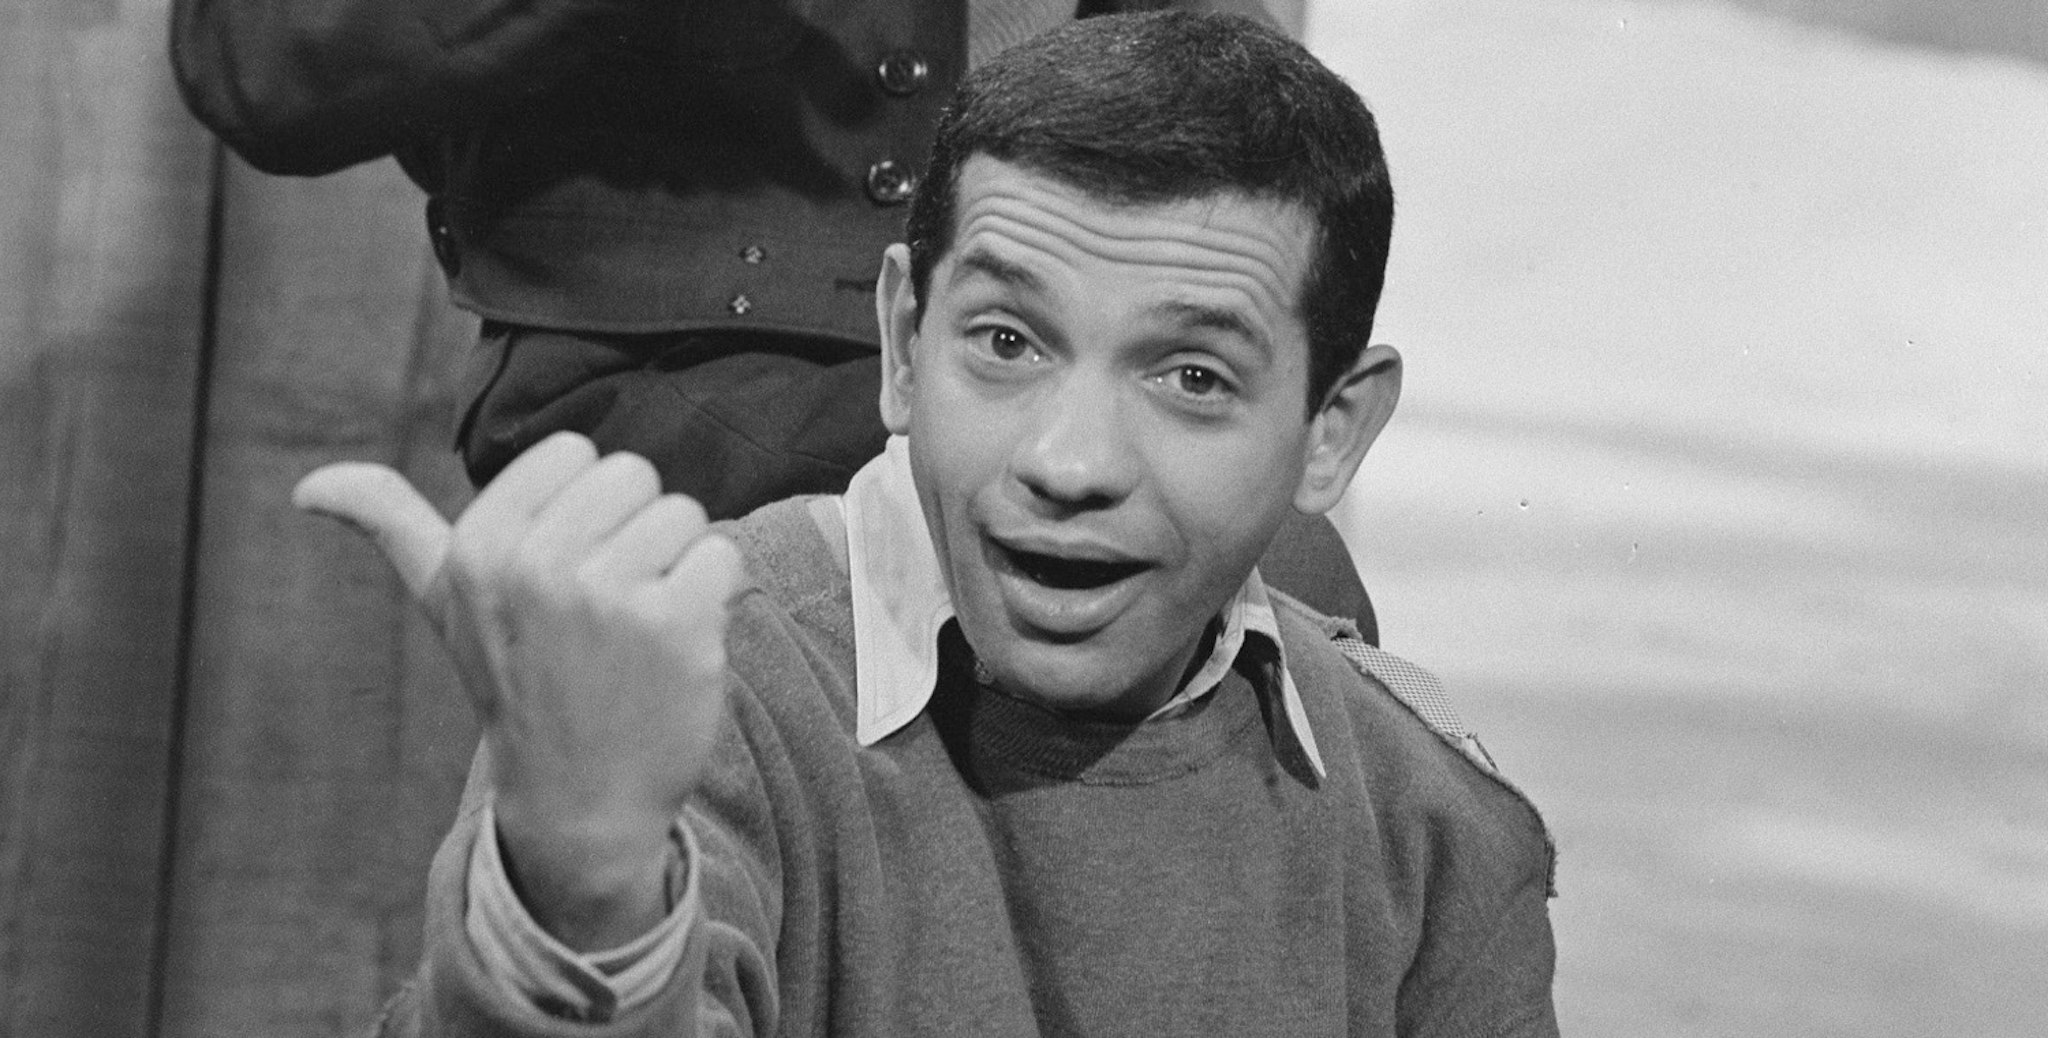 Robert Clary as Cpl. Louis LeBeau in ?The 43rd A Moving Story?, an episode from the CBS television comedy series "Hogan's Heroes", November 18, 1965.